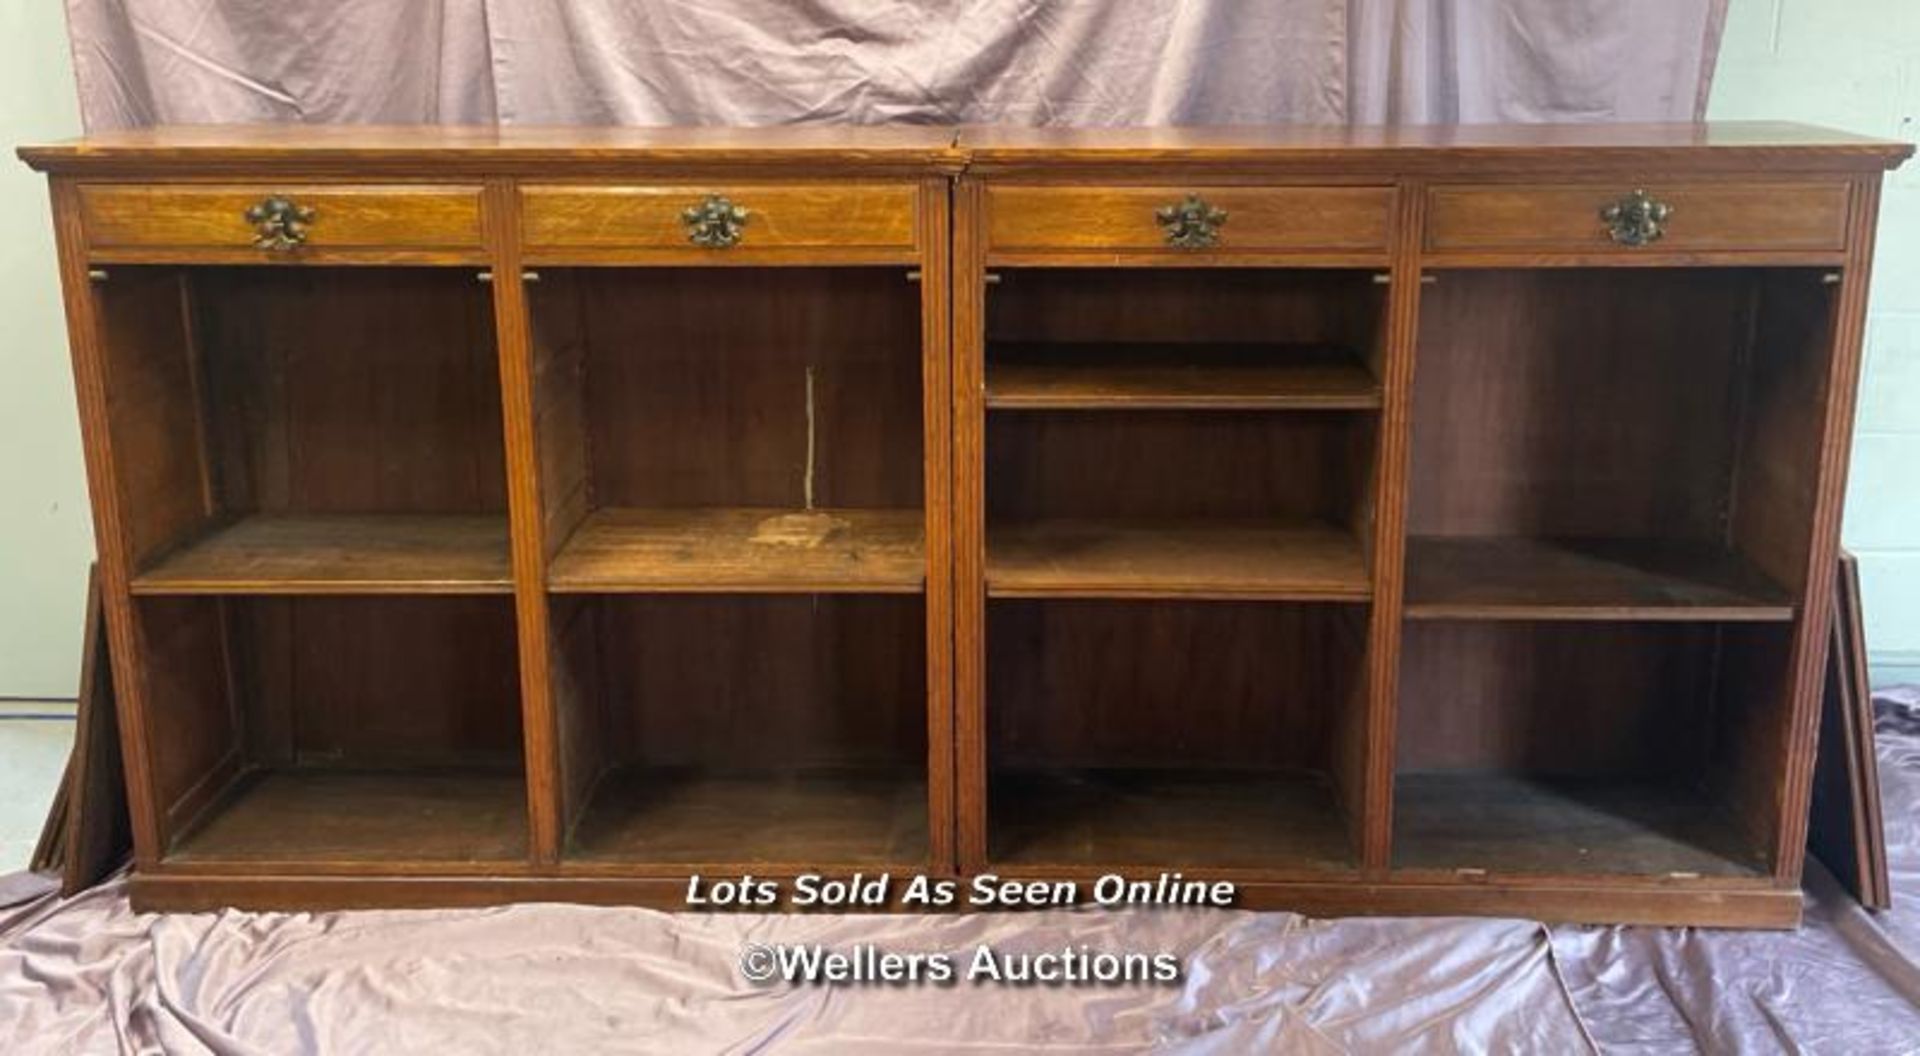 CIRCA 1900, LARGE WOODEN BOOKCASE IN TWO PARTS, WITH FOUR DRAWERS AND EIGHT ADJUSTABLE SHELVES, - Image 5 of 6